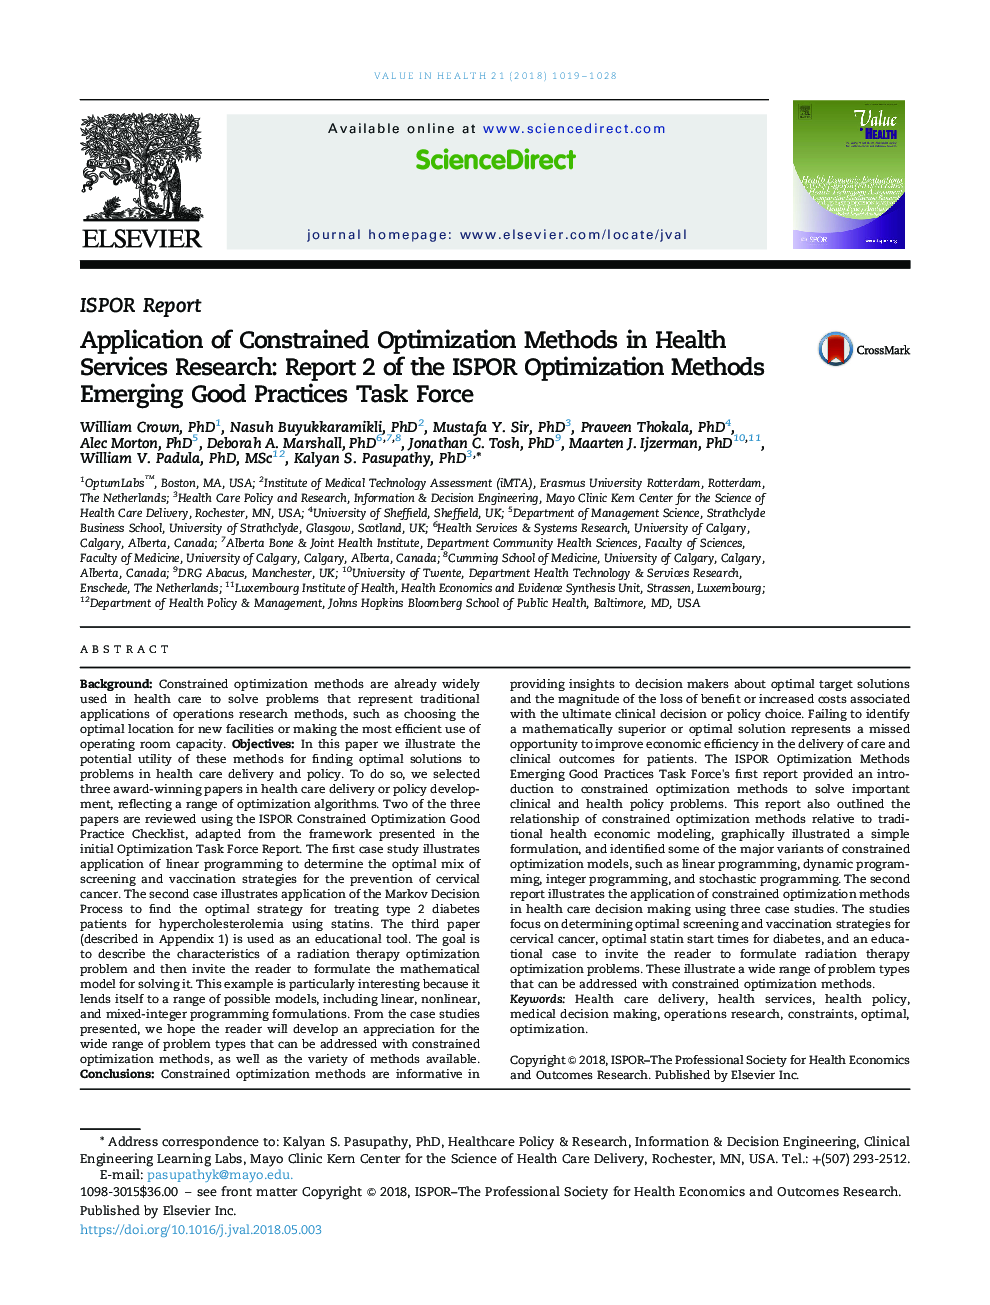 Application of Constrained Optimization Methods in Health Services Research: Report 2 of the ISPOR Optimization Methods Emerging Good Practices Task Force